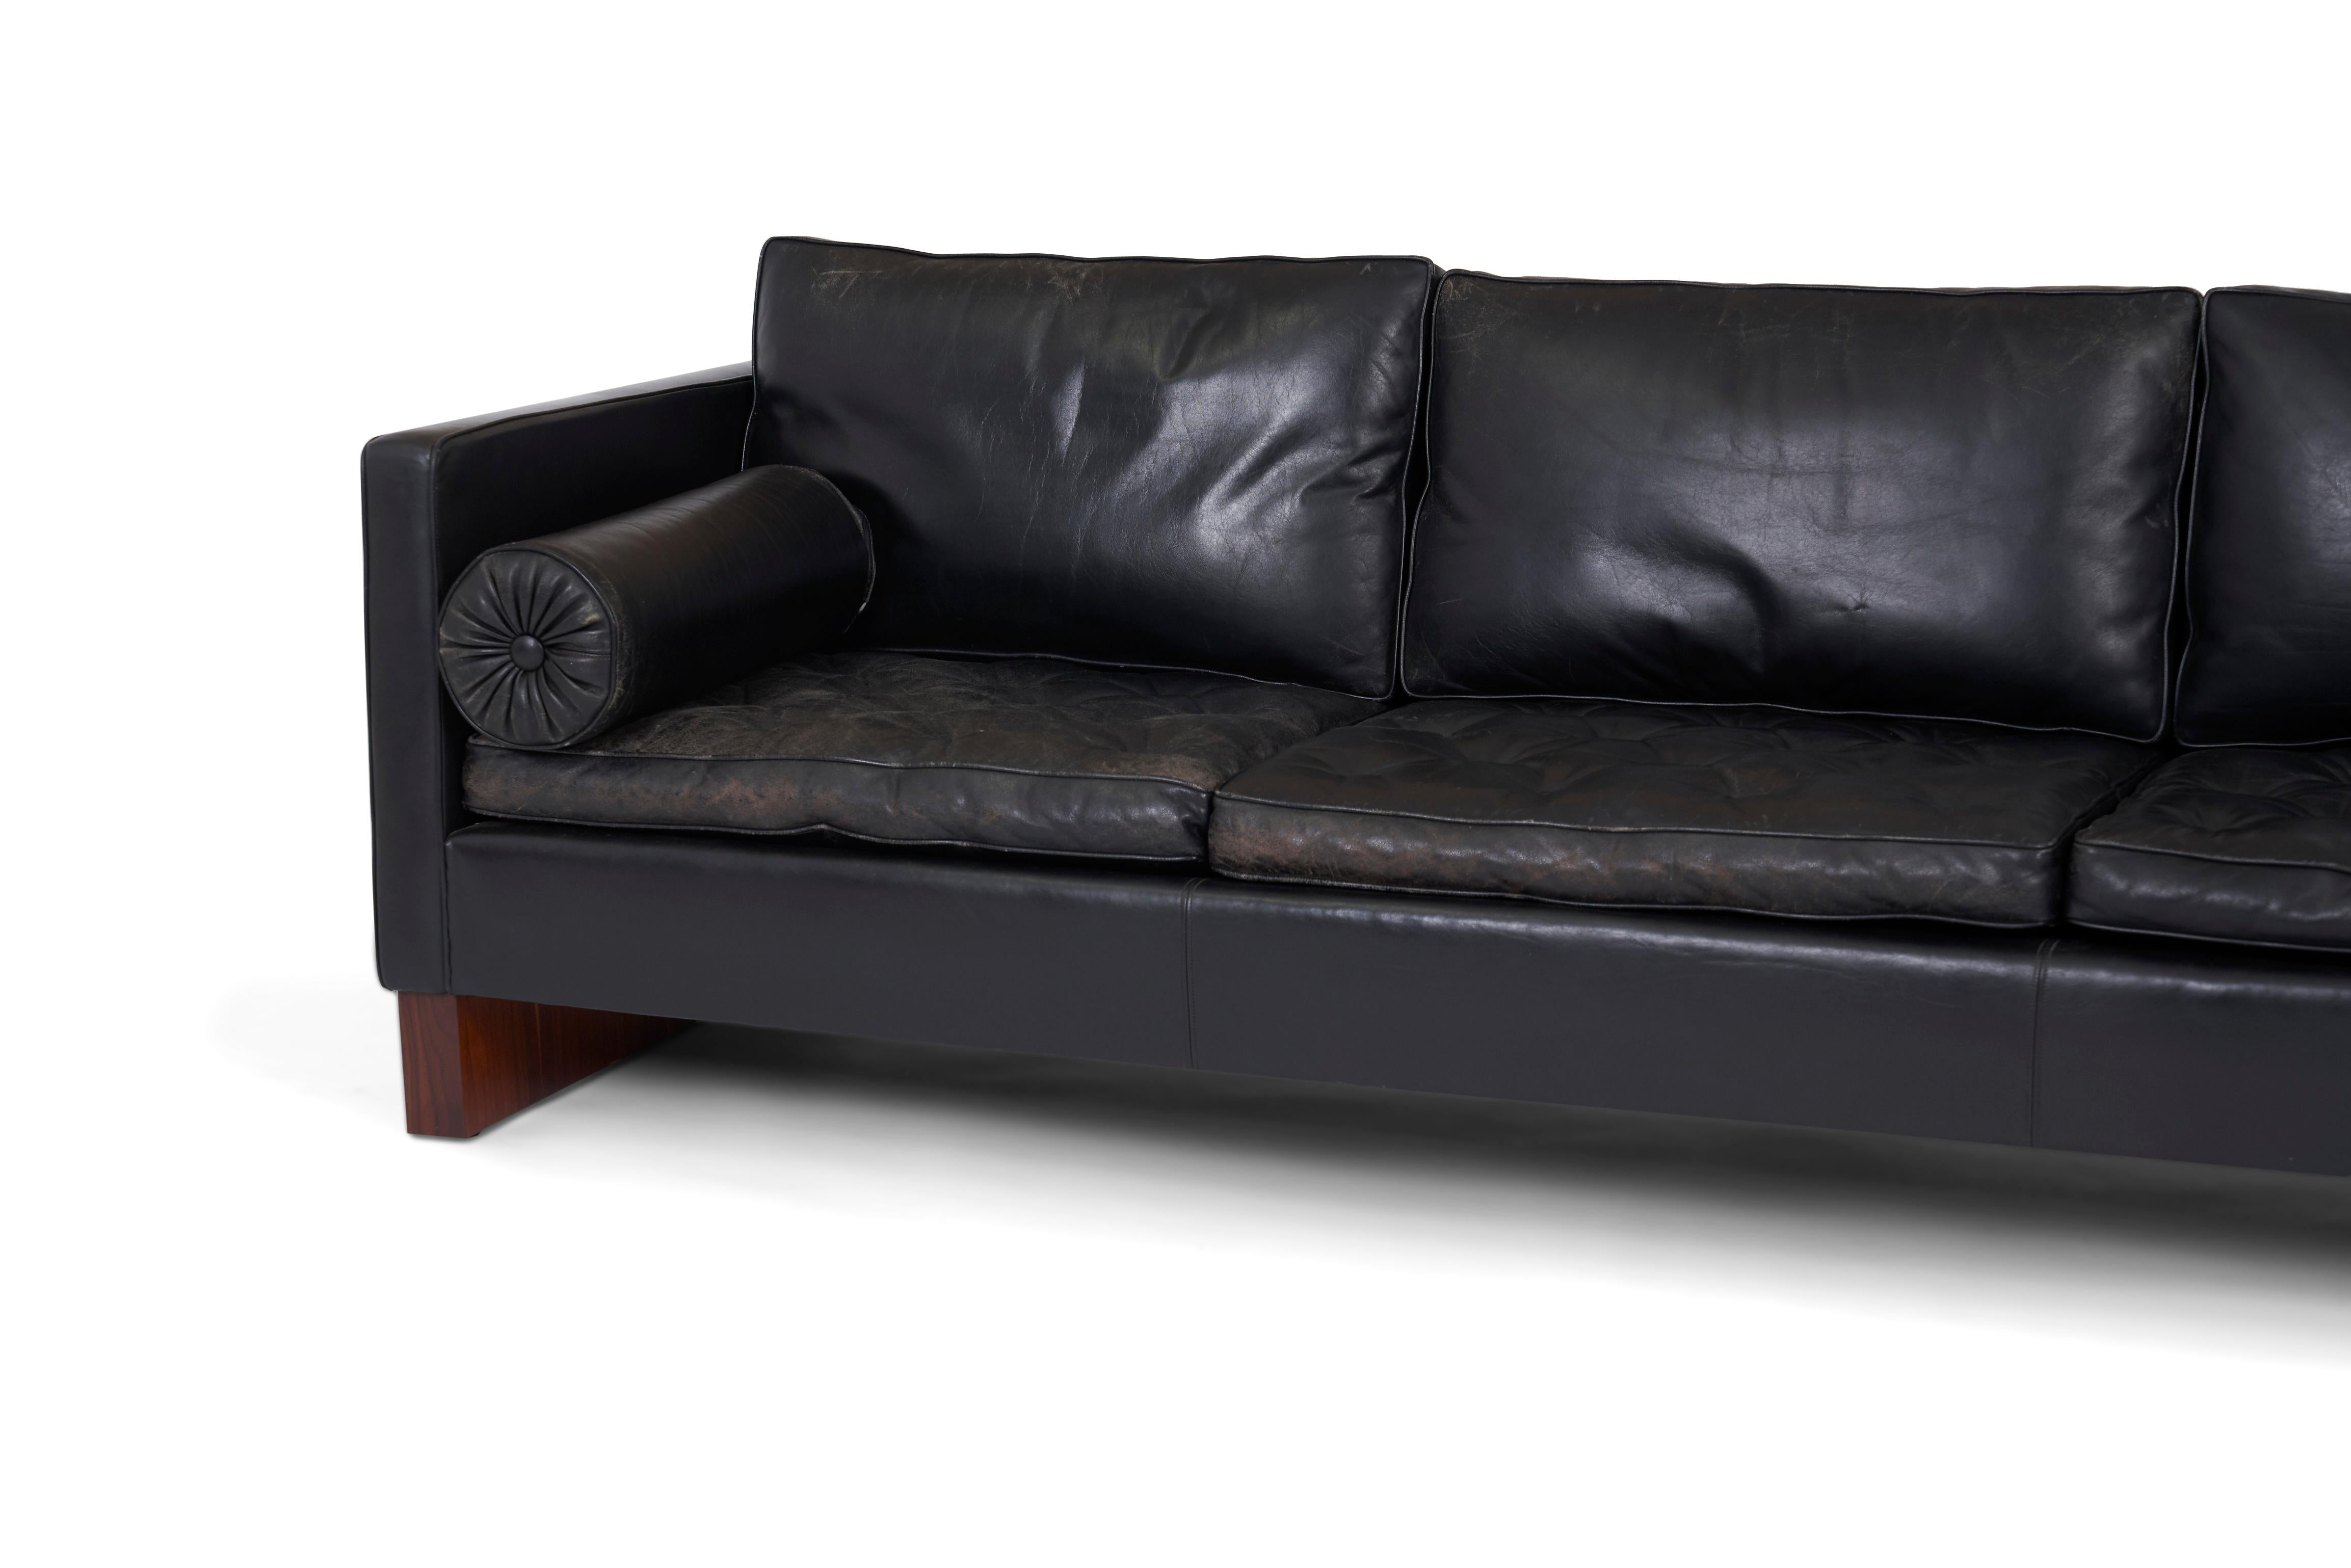 Rare Ludwig Mies van der Rohe designed sofa. Designed by Mies in Germany, 1930, produced by Knoll in 1960. Refinished rosewood bases with original black leather upholstery.